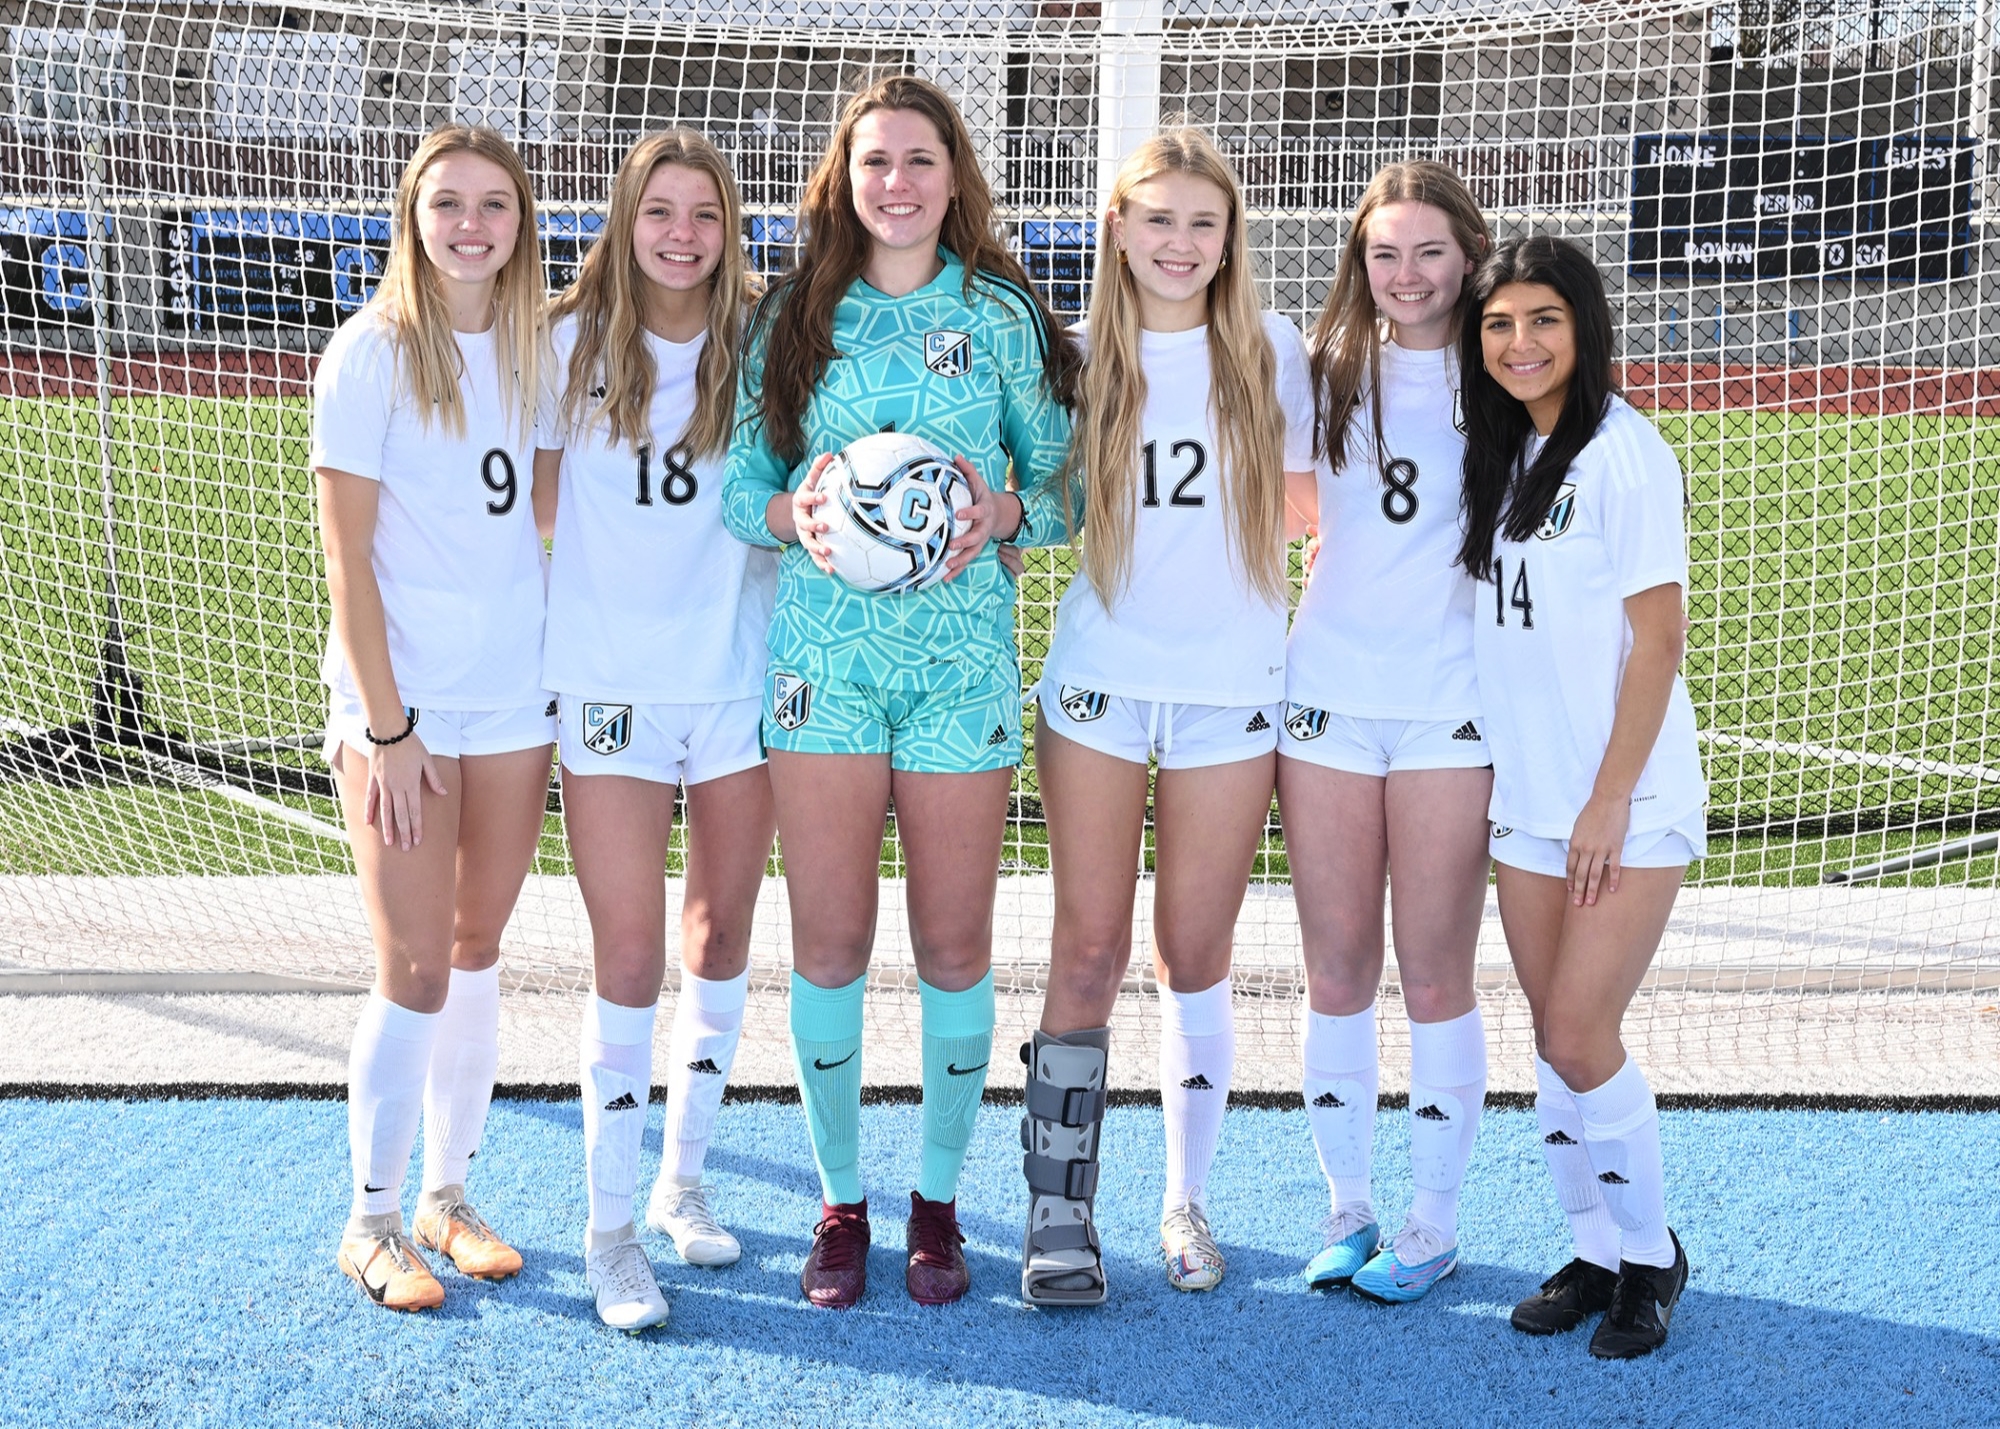 6 Grand Rapids Christian High School girl soccer players standing together